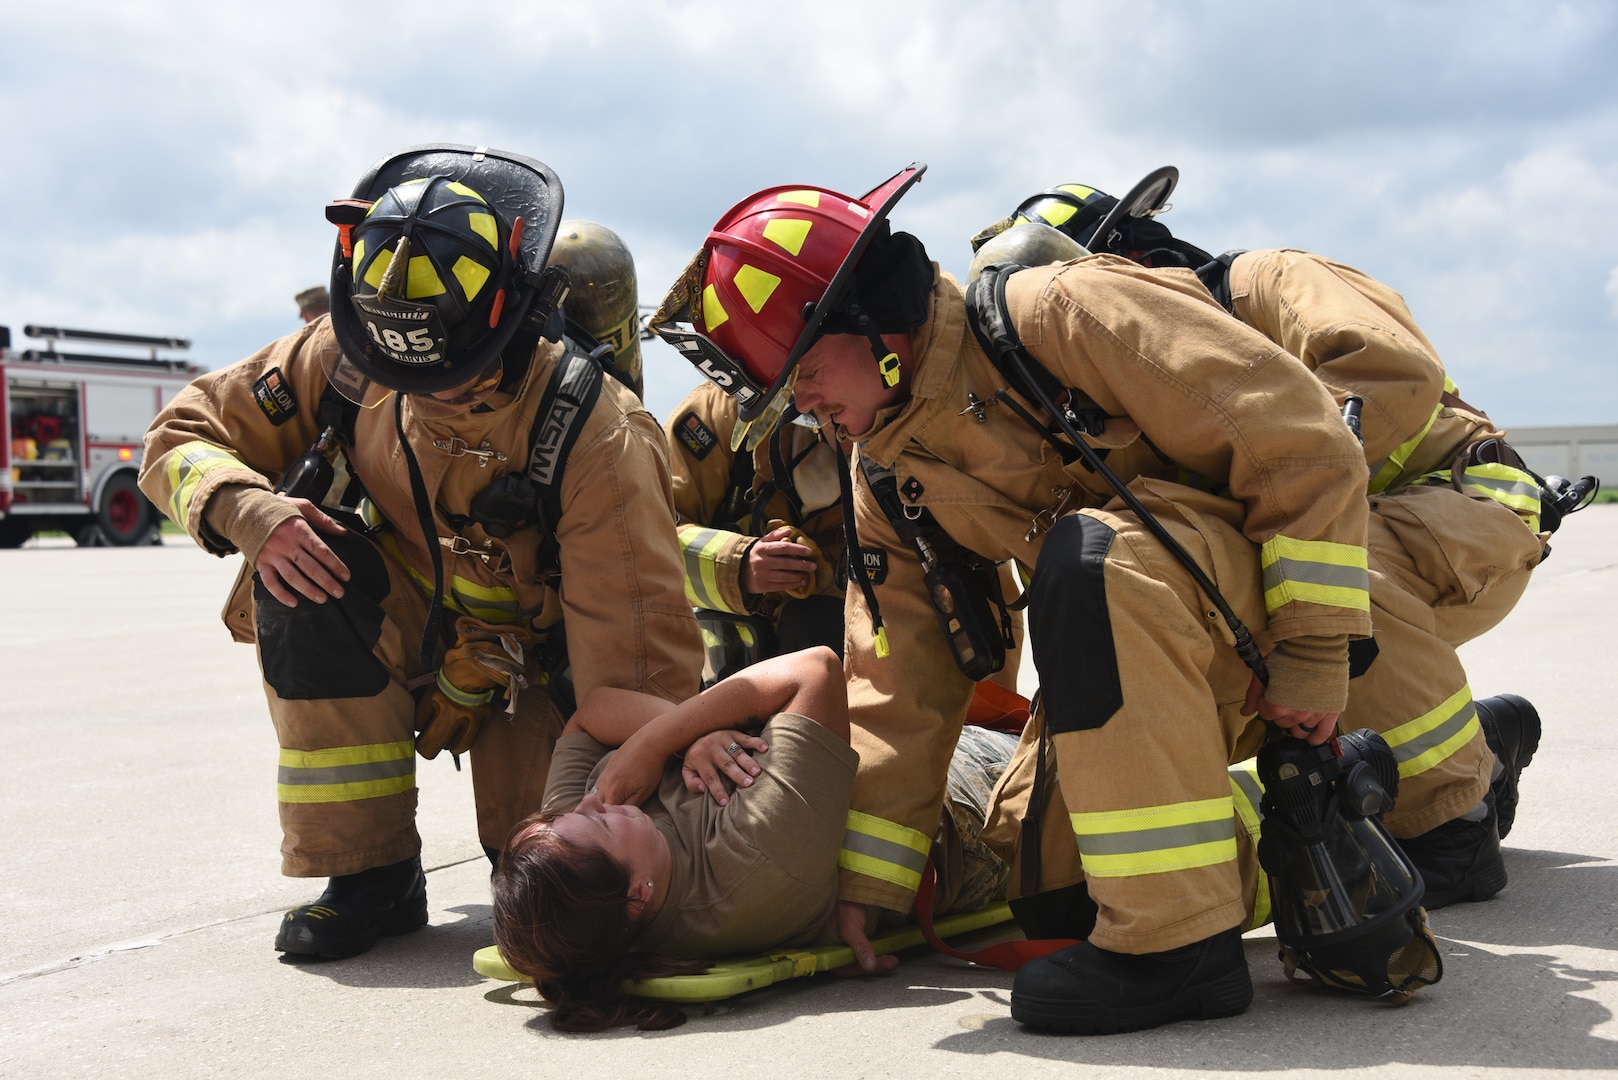 The Iowa Air National Guard's 185th Air Refueling Wing medical group conducted a simulated mass casualty exercise Aug. 5, 2023, in Sioux City, Iowa. Exercise role players were rescued by the unit’s firefighters and treated by medical personnel during the training.